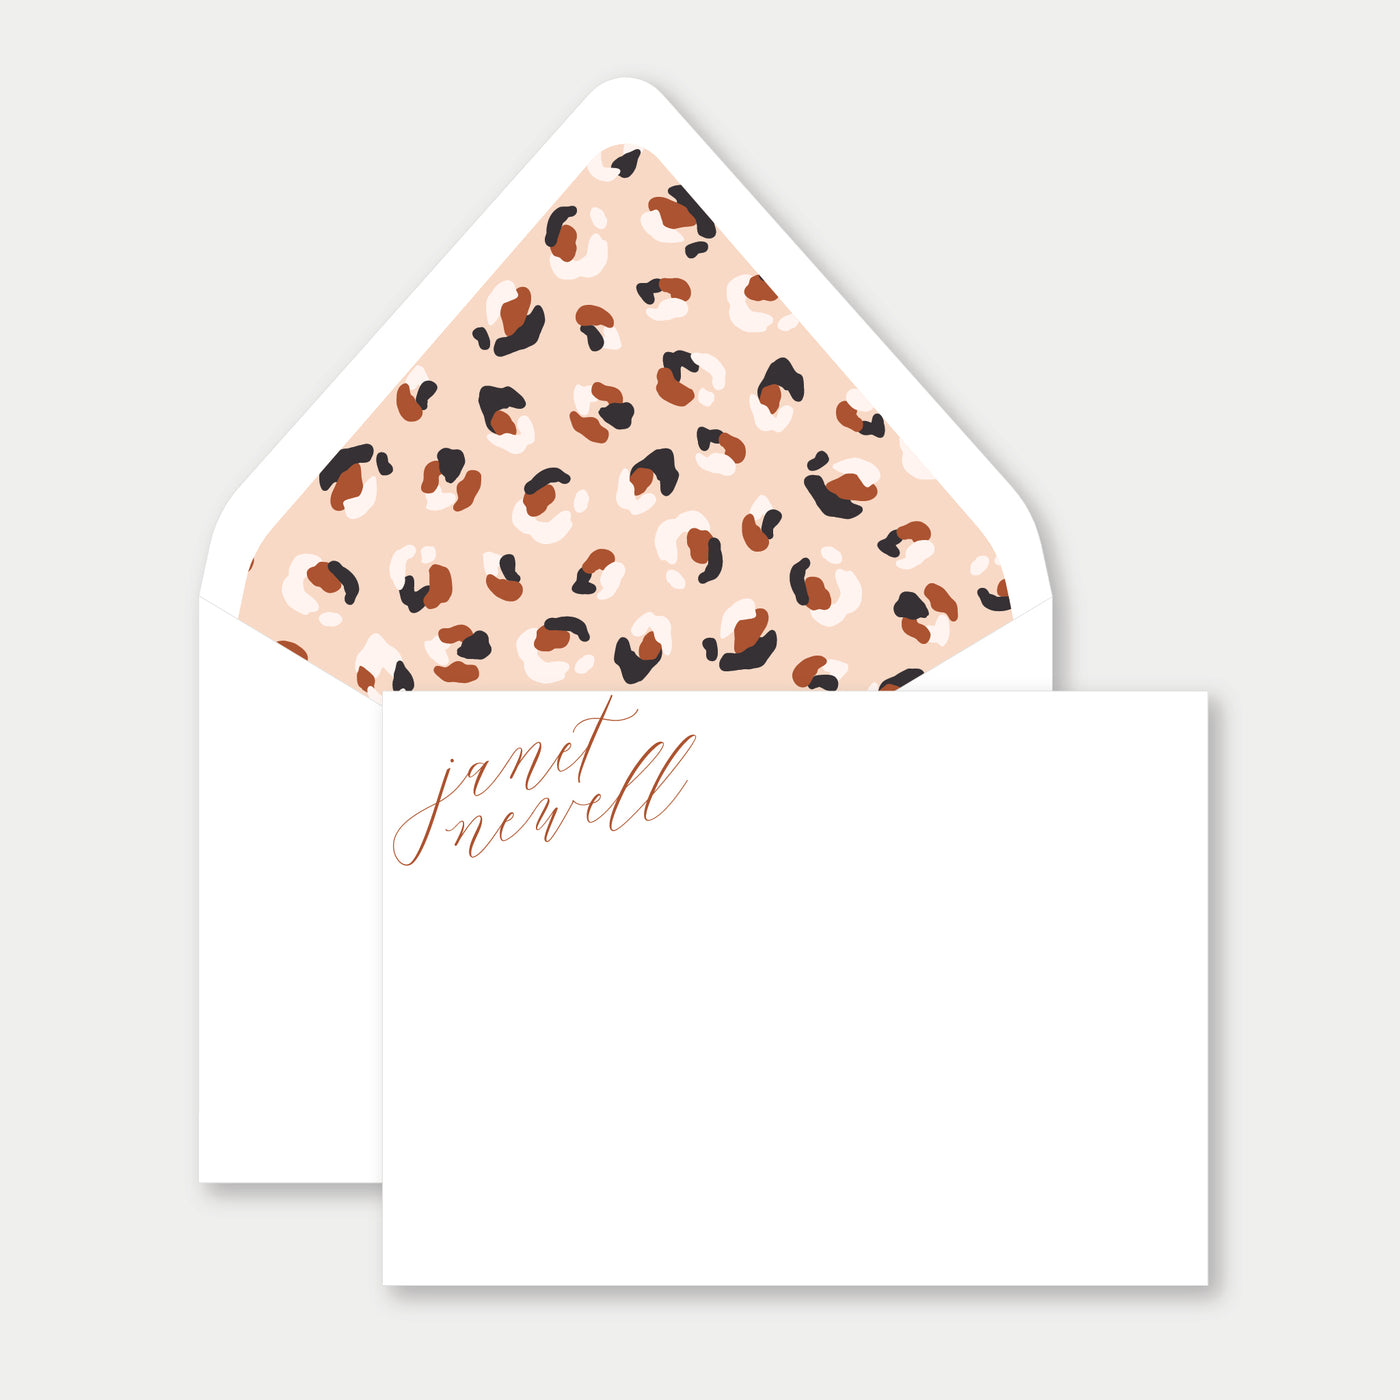 Personal Stationery - Janet